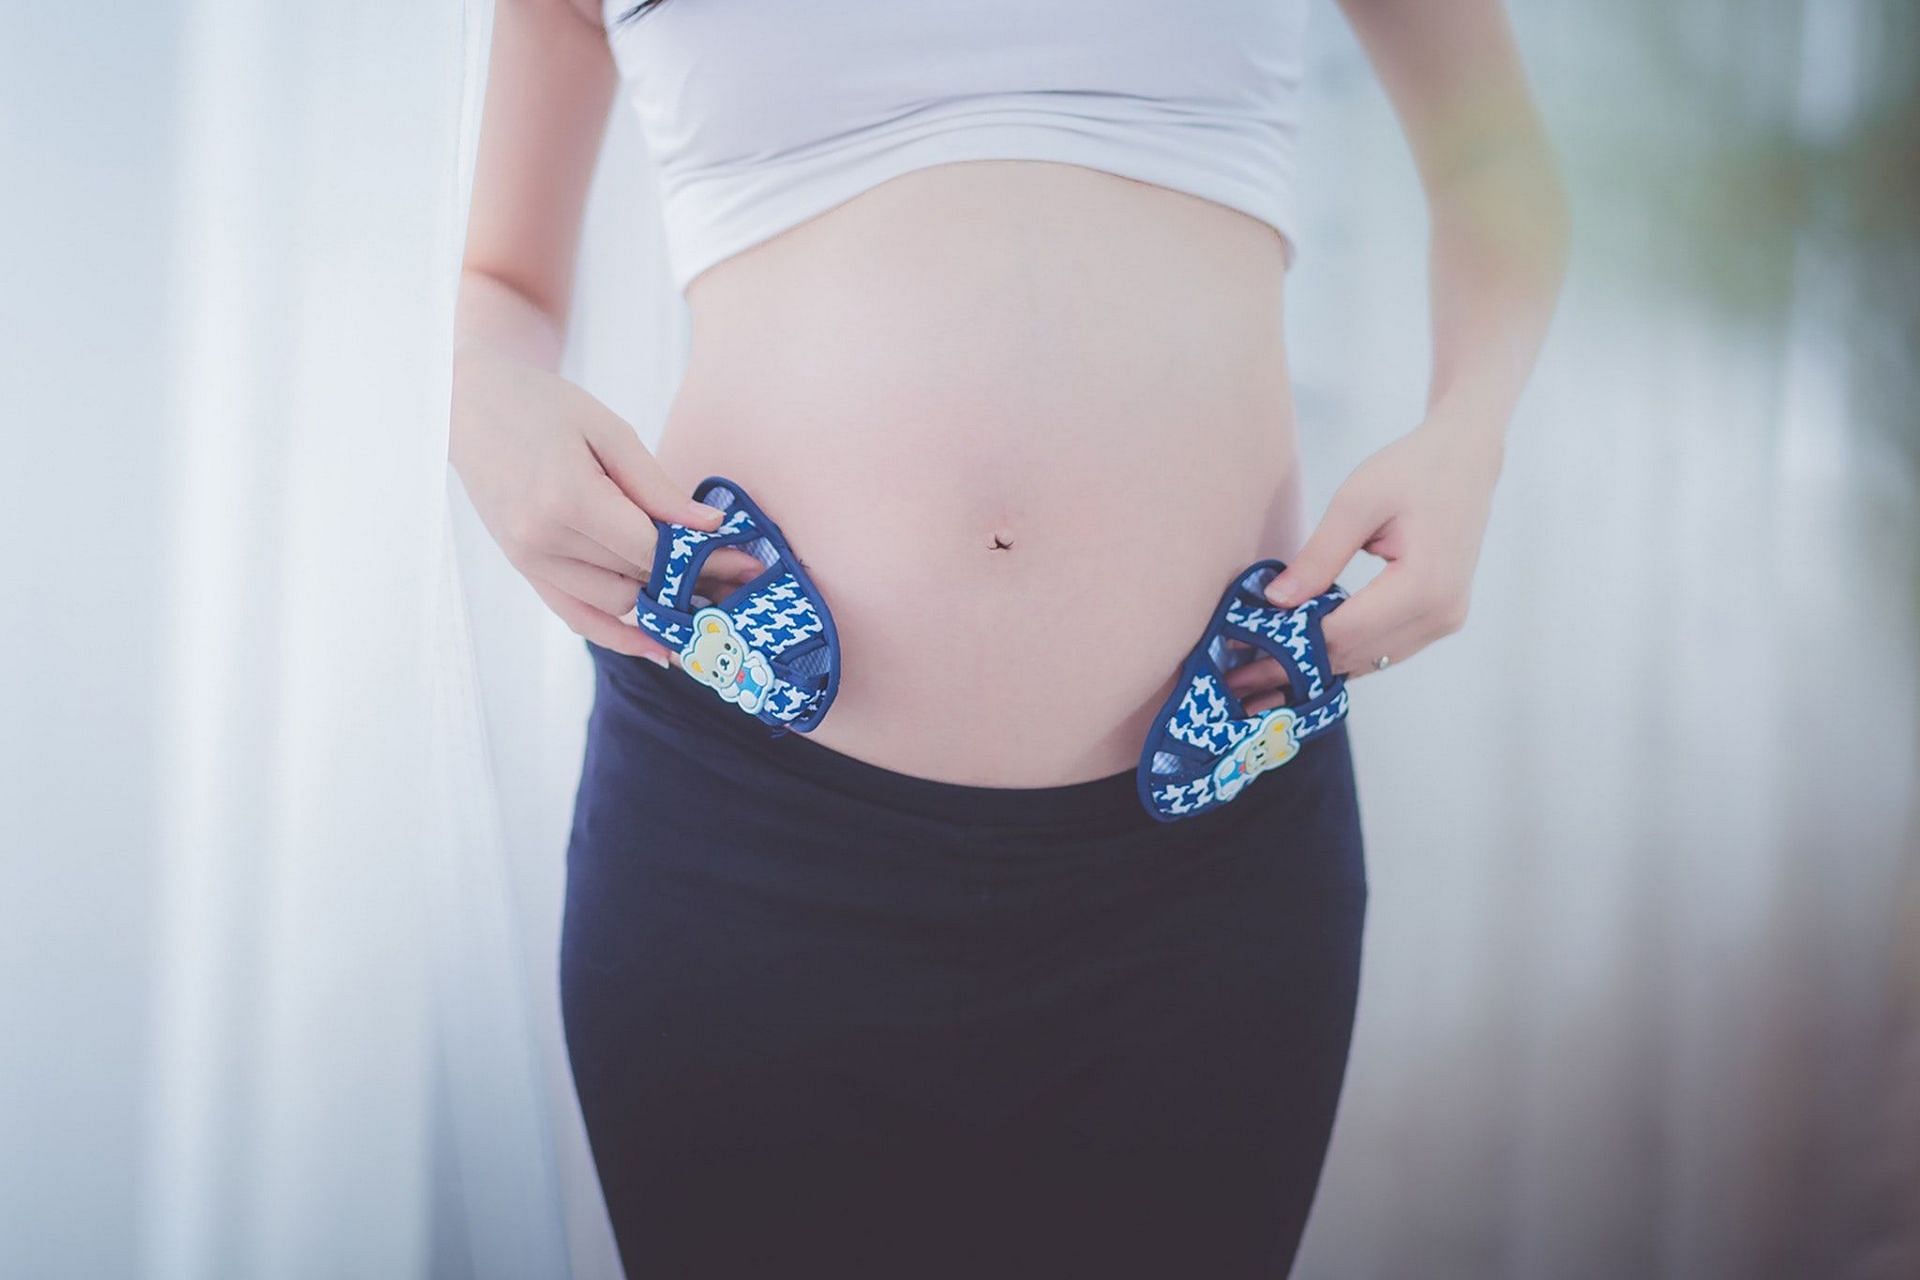 Itching during pregnancy is common. (Image via Pexels/ Pixabay)